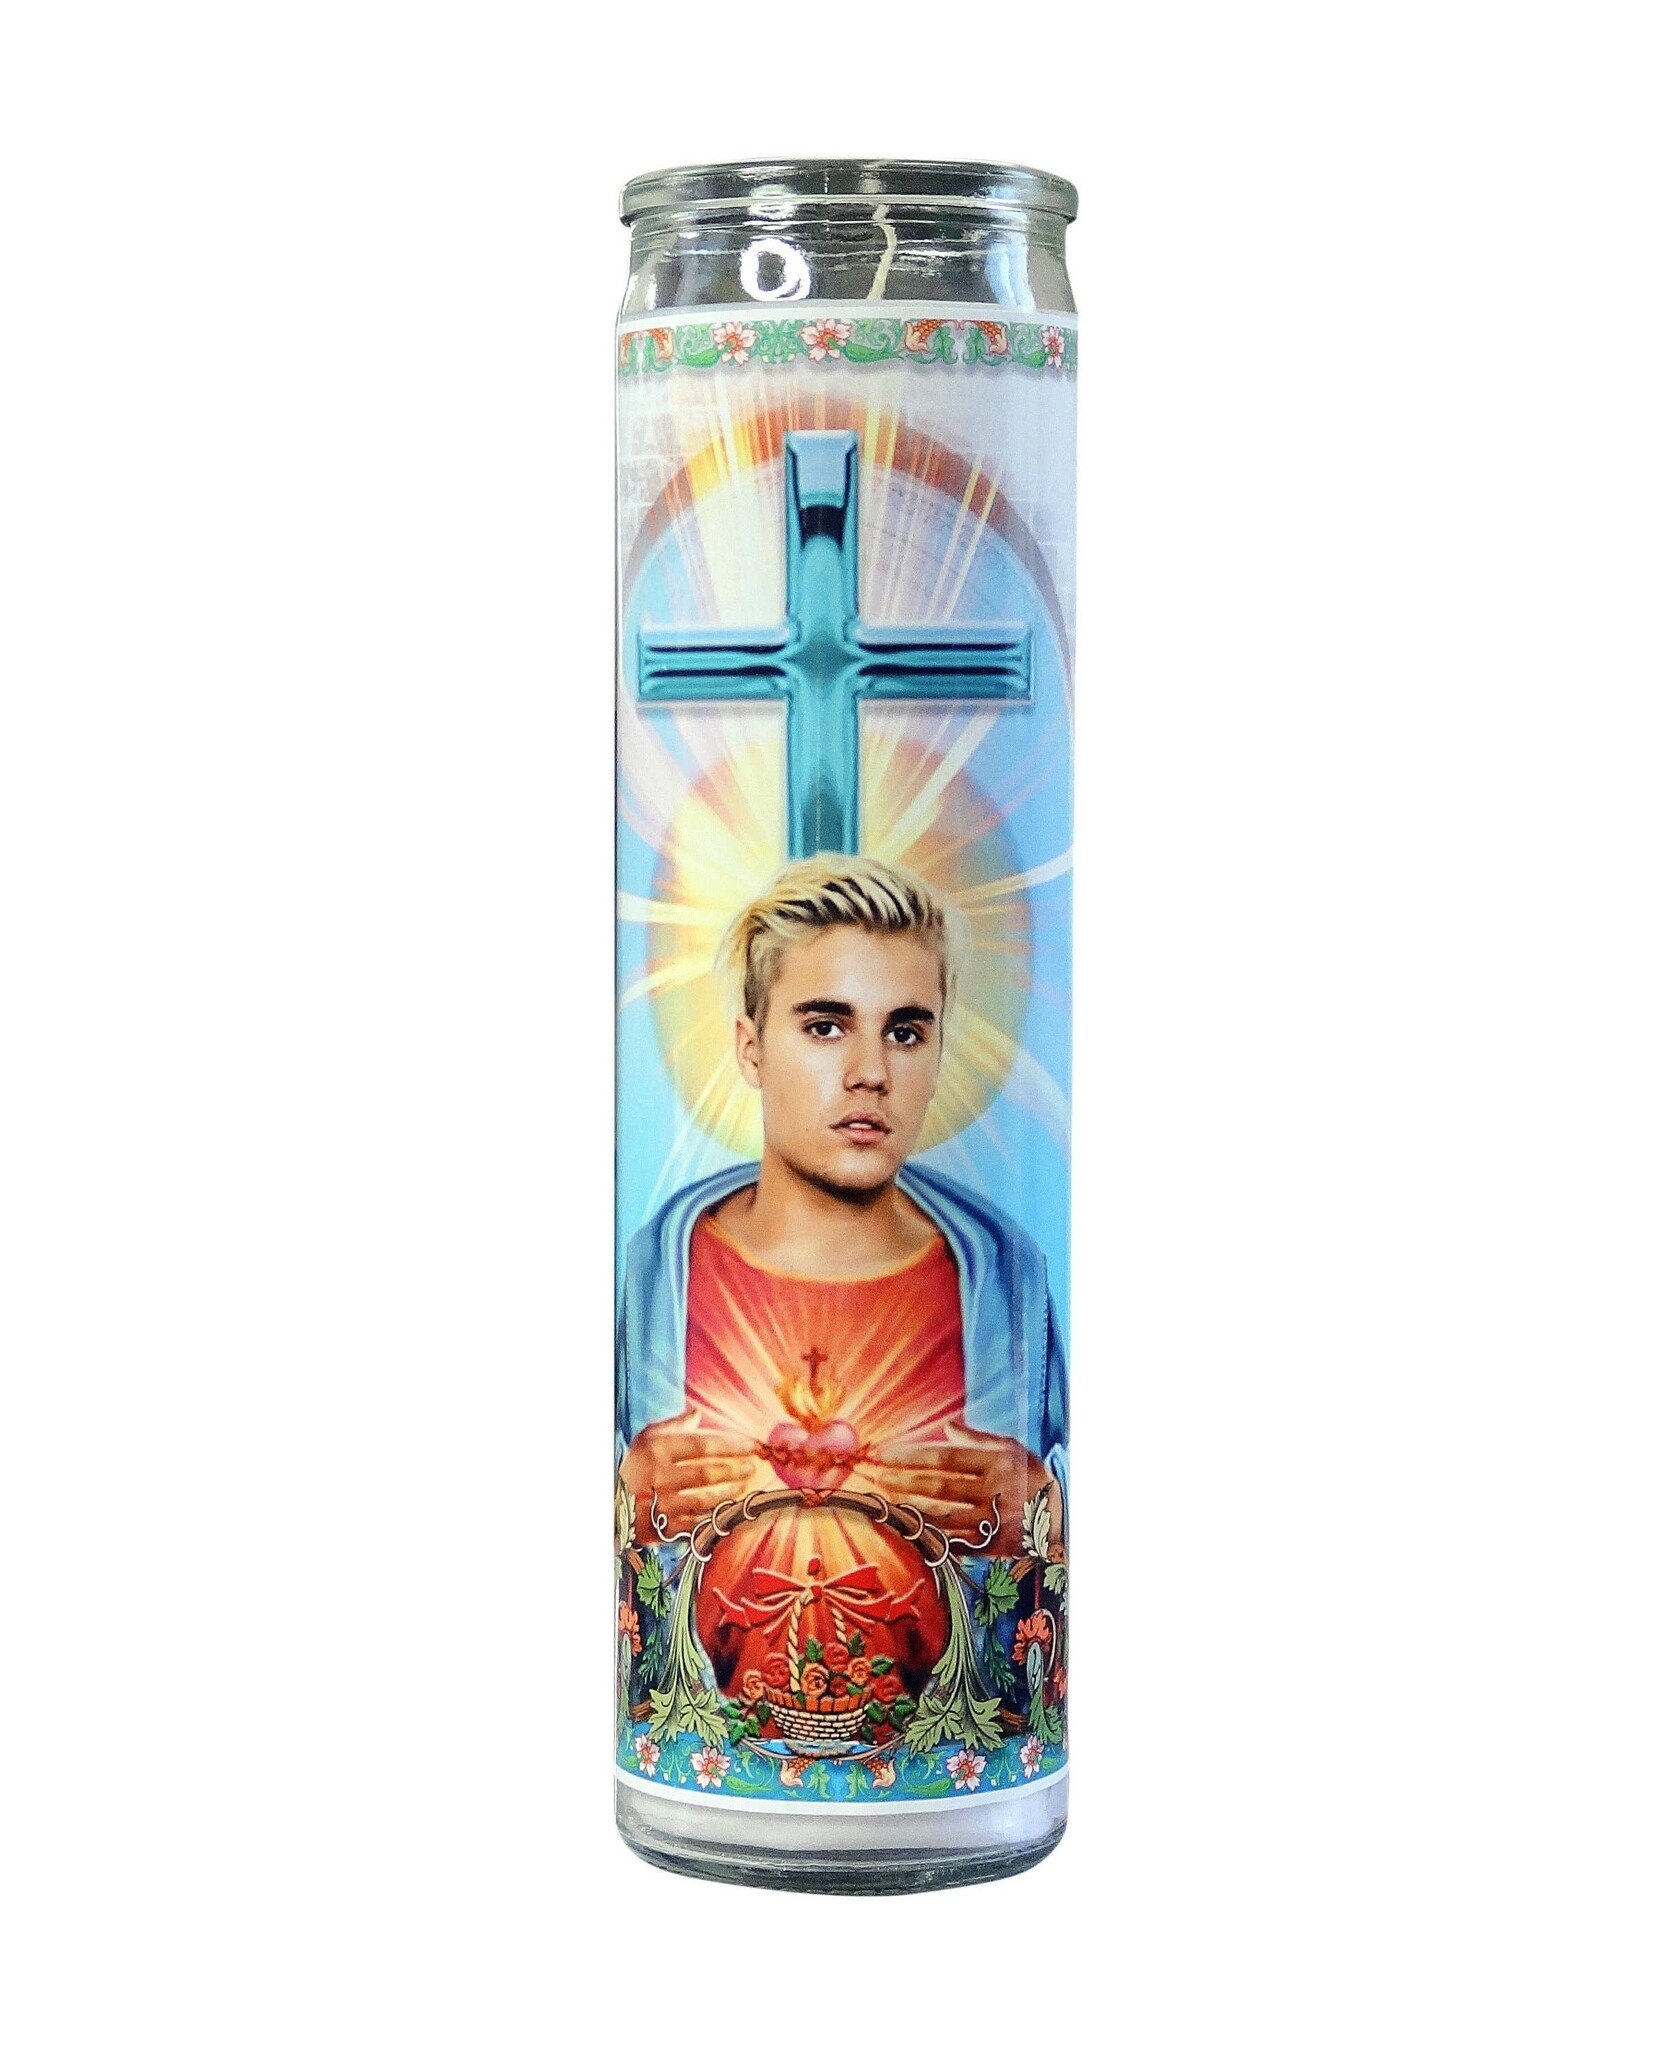 Celebrity Prayer Candles: Illuminating Your Devotion with a Dash of Fame!